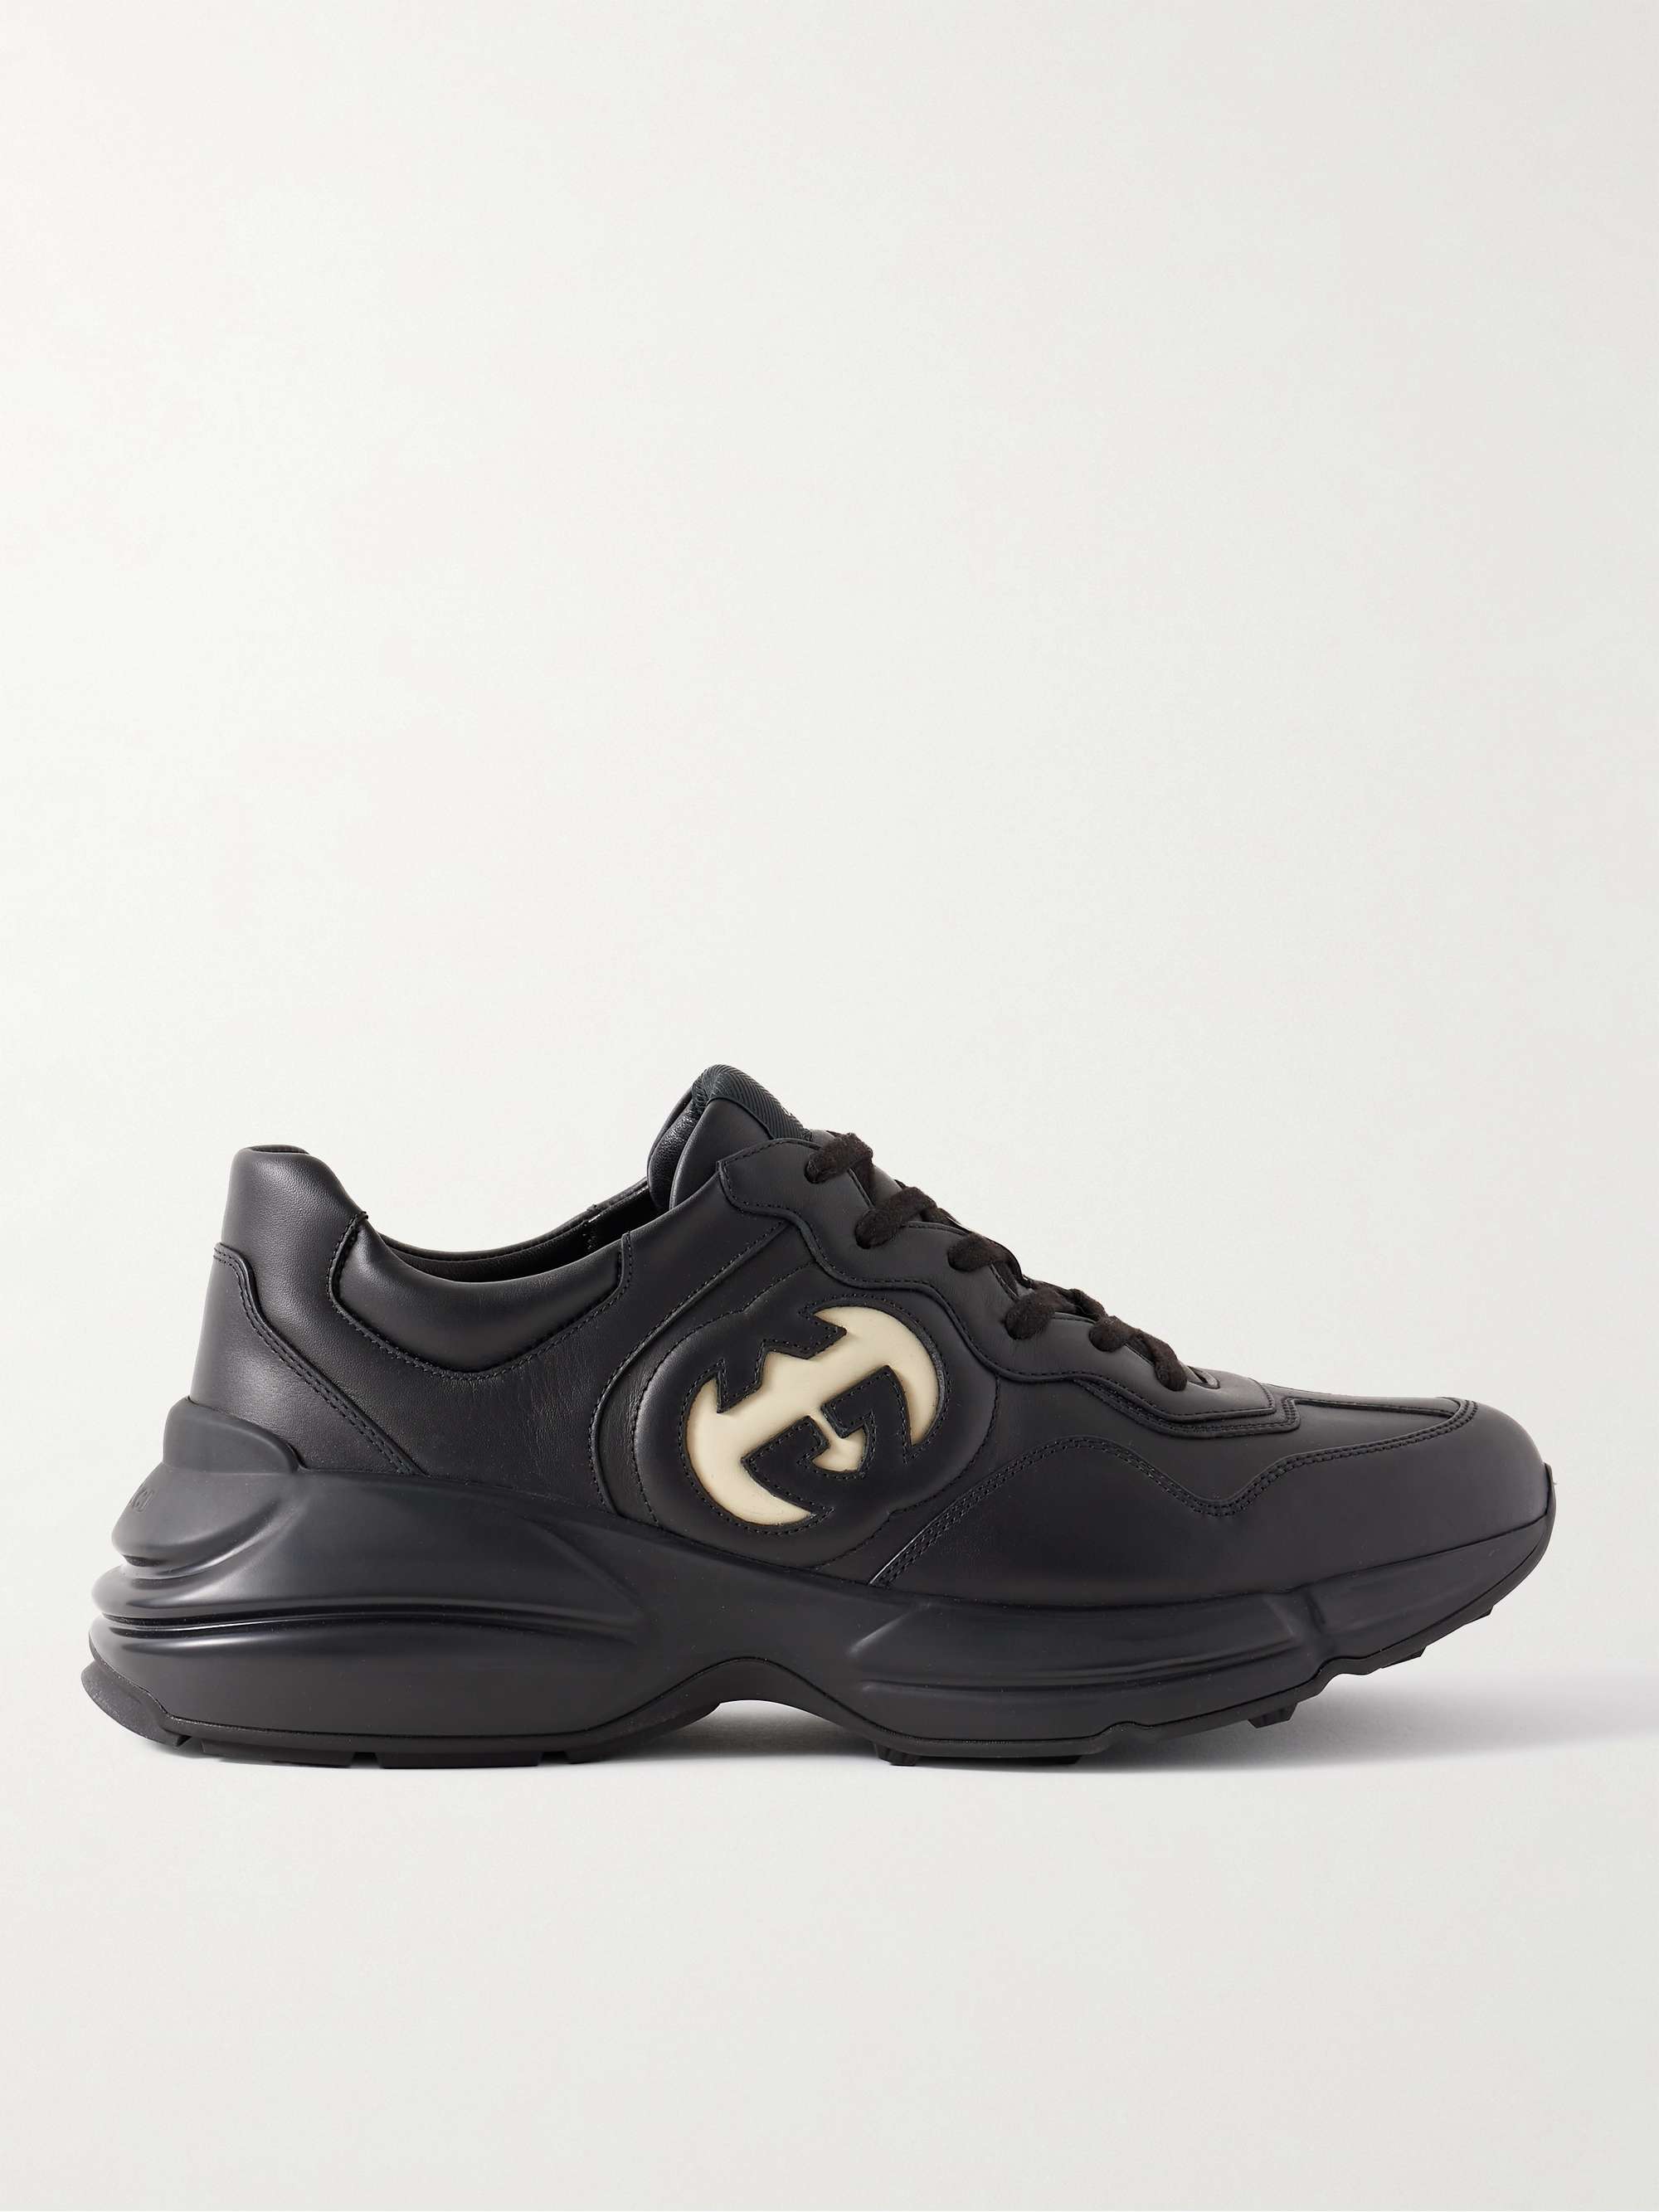 Gucci Rhyton Leather Sneakers